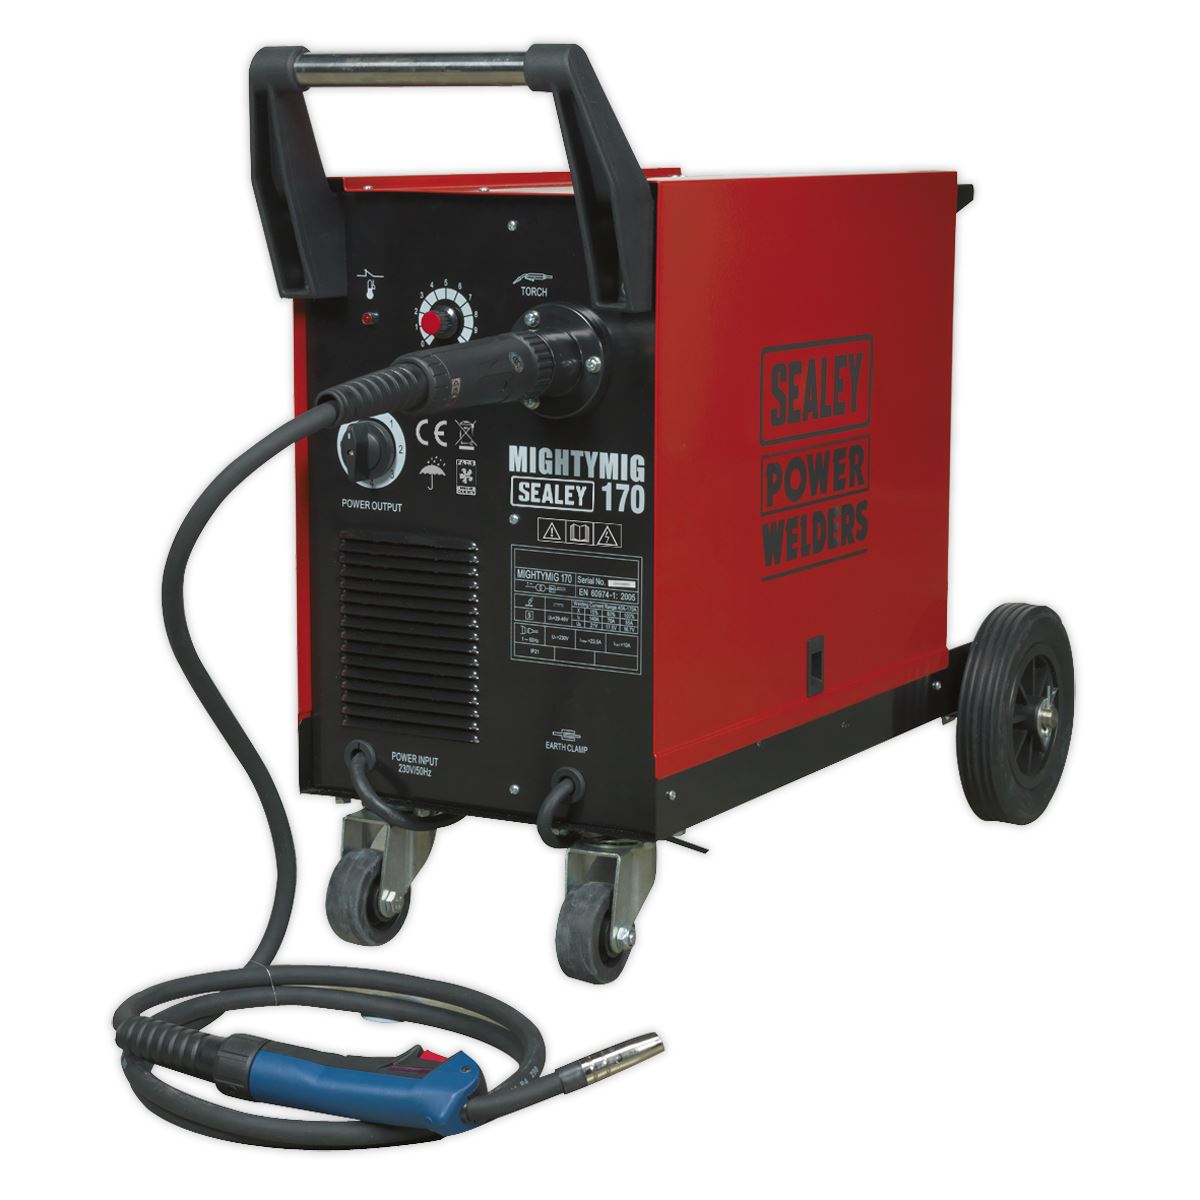 Sealey Professional Gas/Gasless MIG Welder 170A with Euro Torch